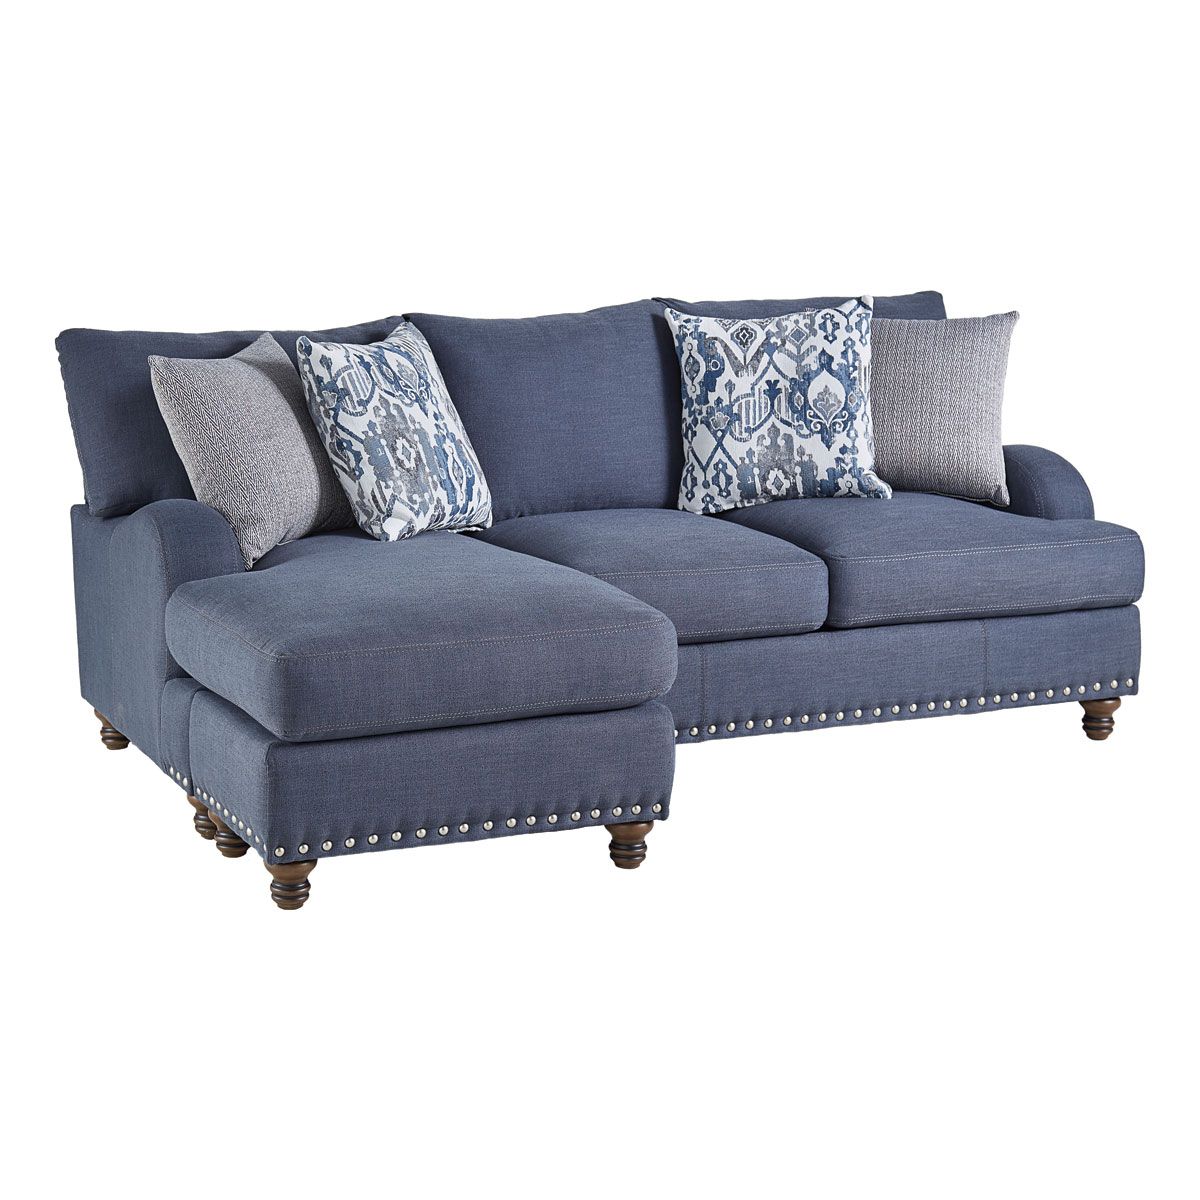 2-PC SOFA SET W/ 4 ACCENT PILLOWS The Furniture Store